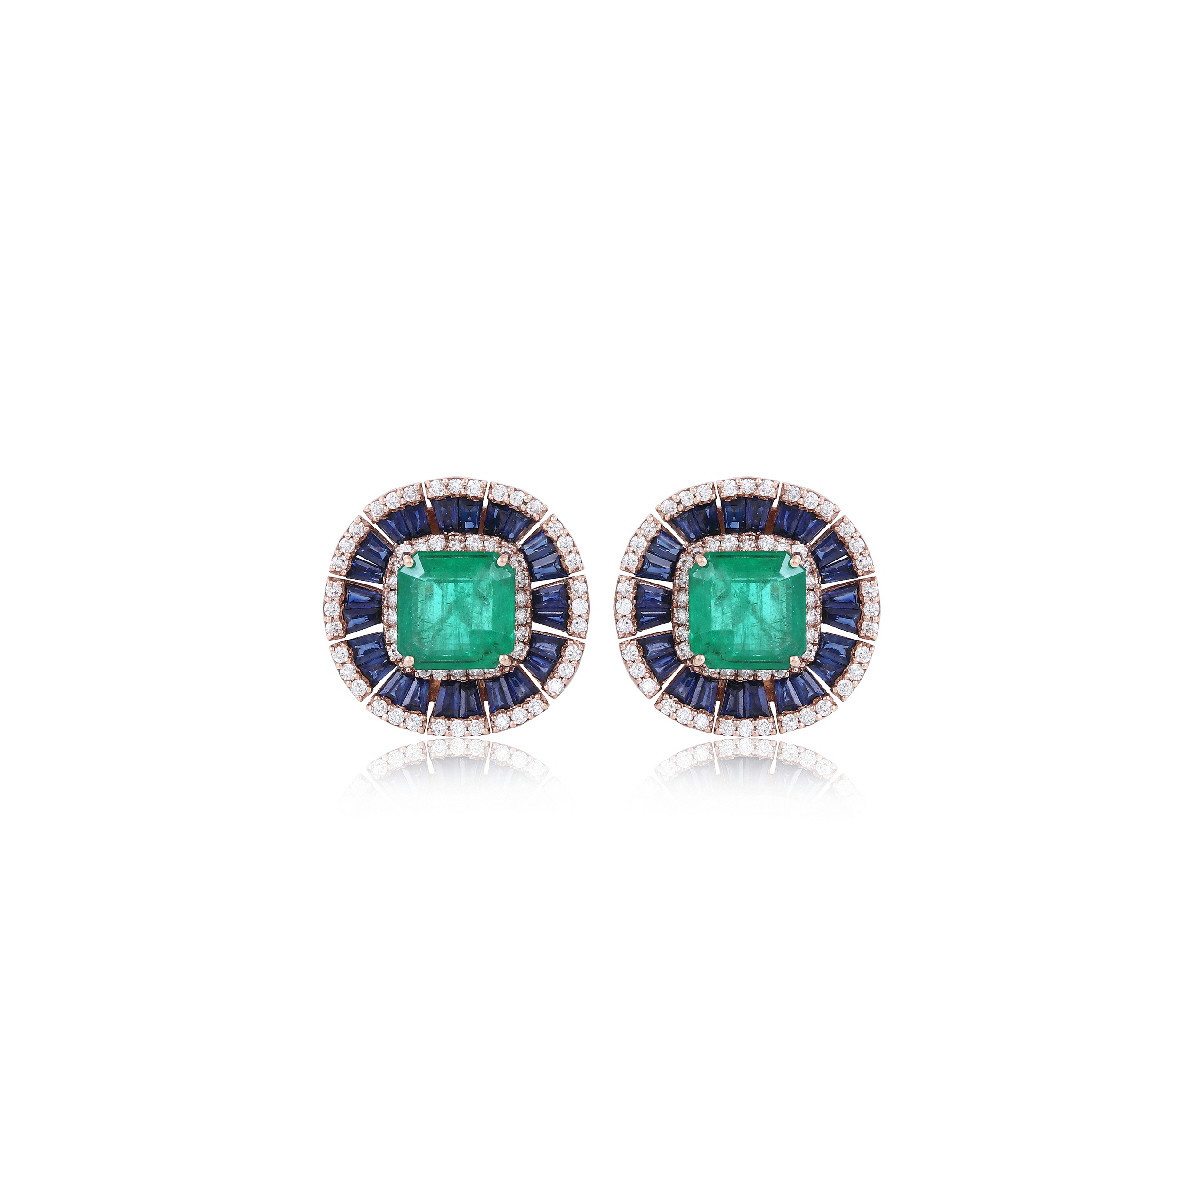 Emerald and sapphire earrings